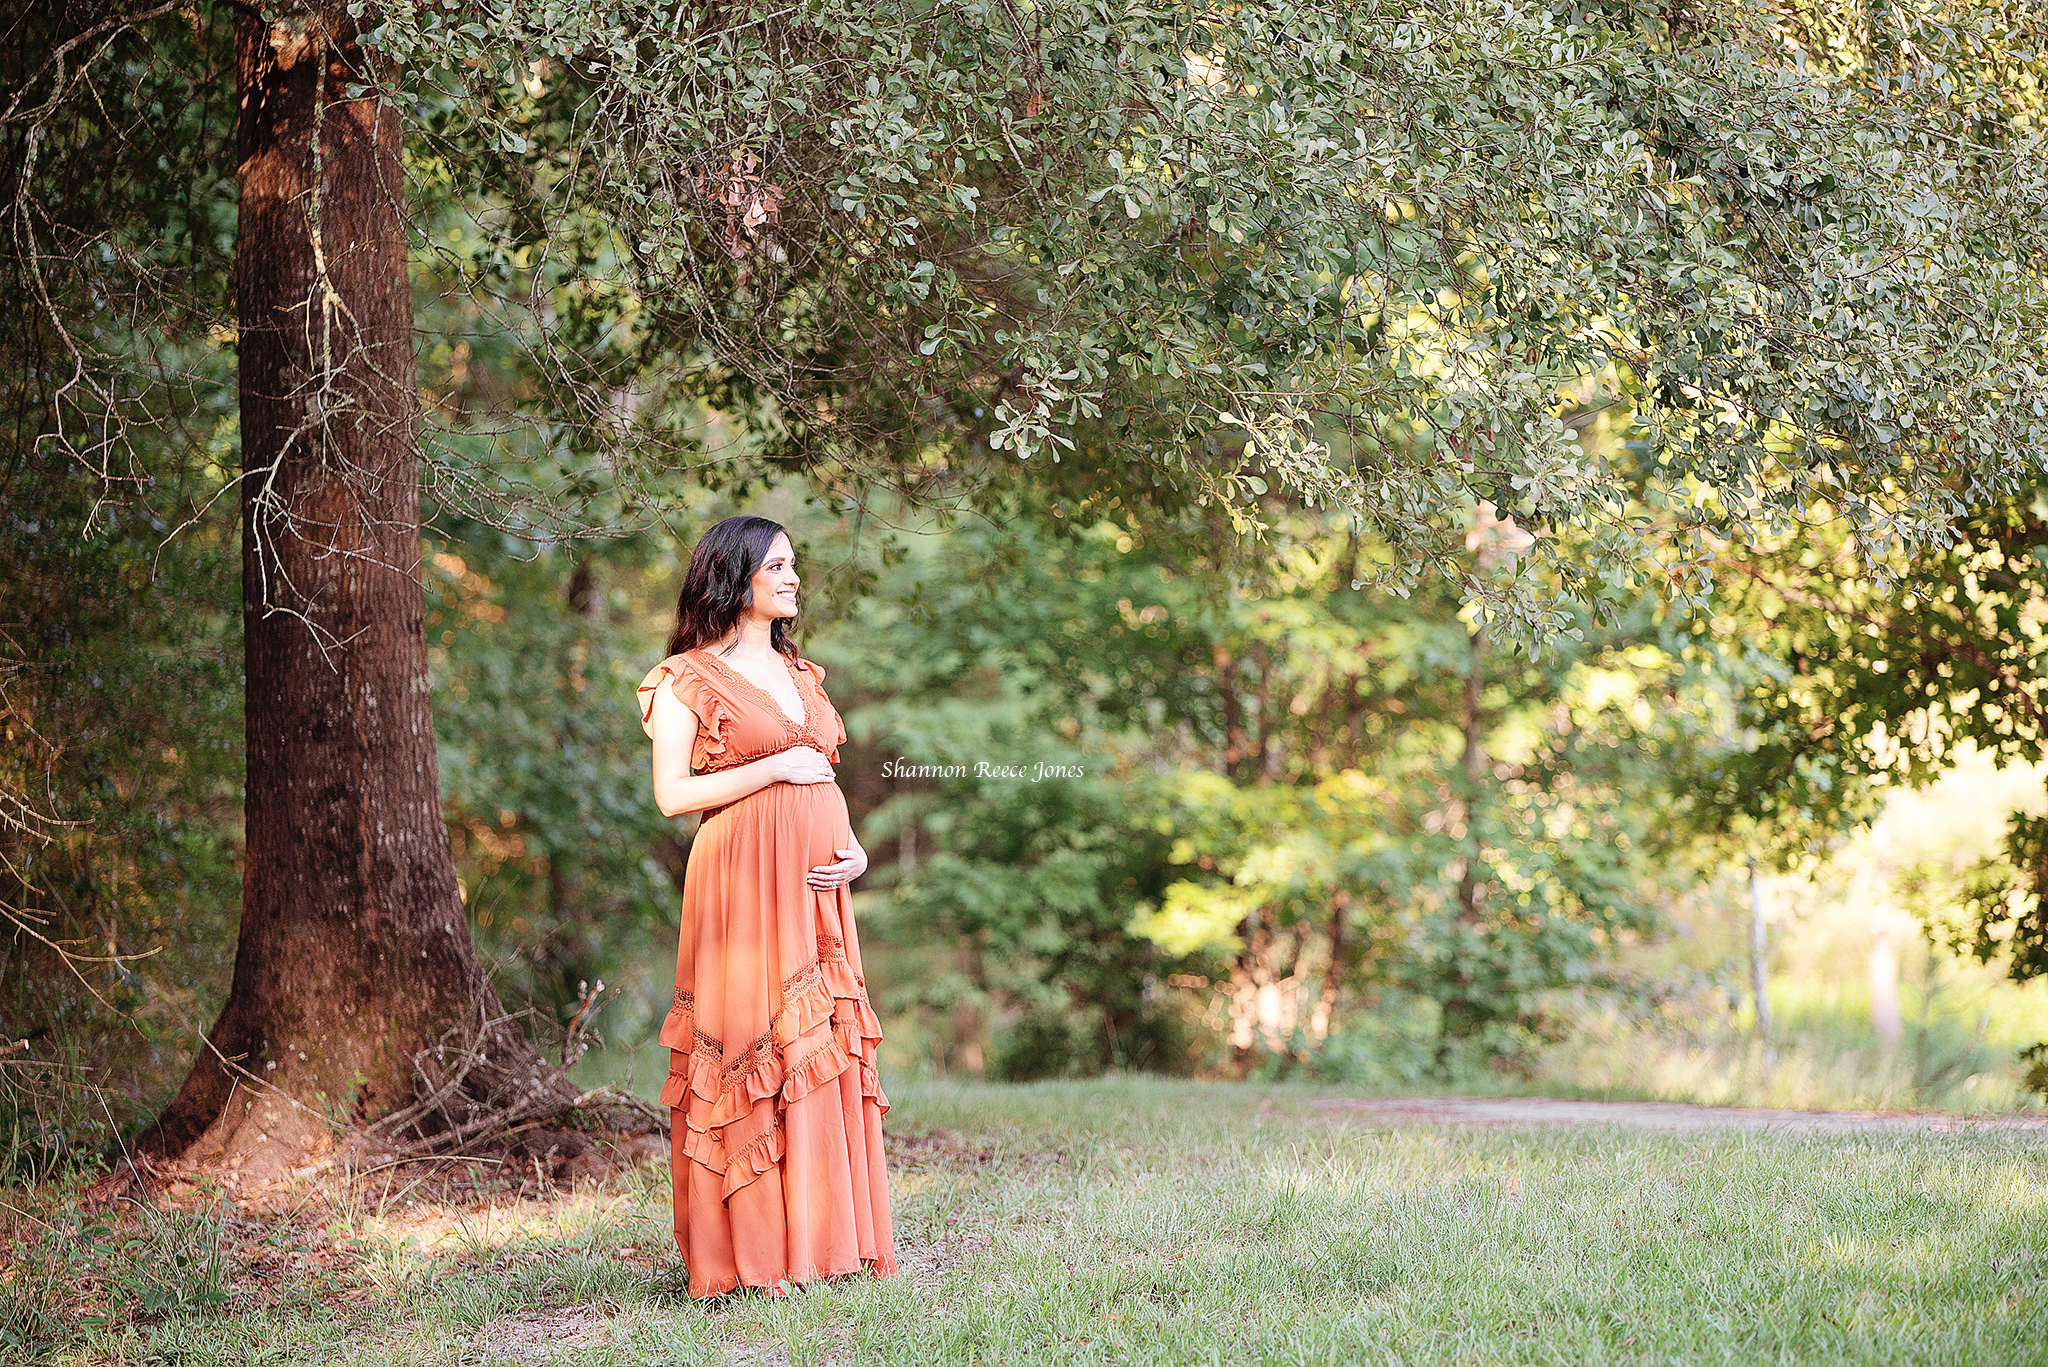 sunrise maternity portraits near me Houston Texas, woman in ruffled maternity gown looking into distance